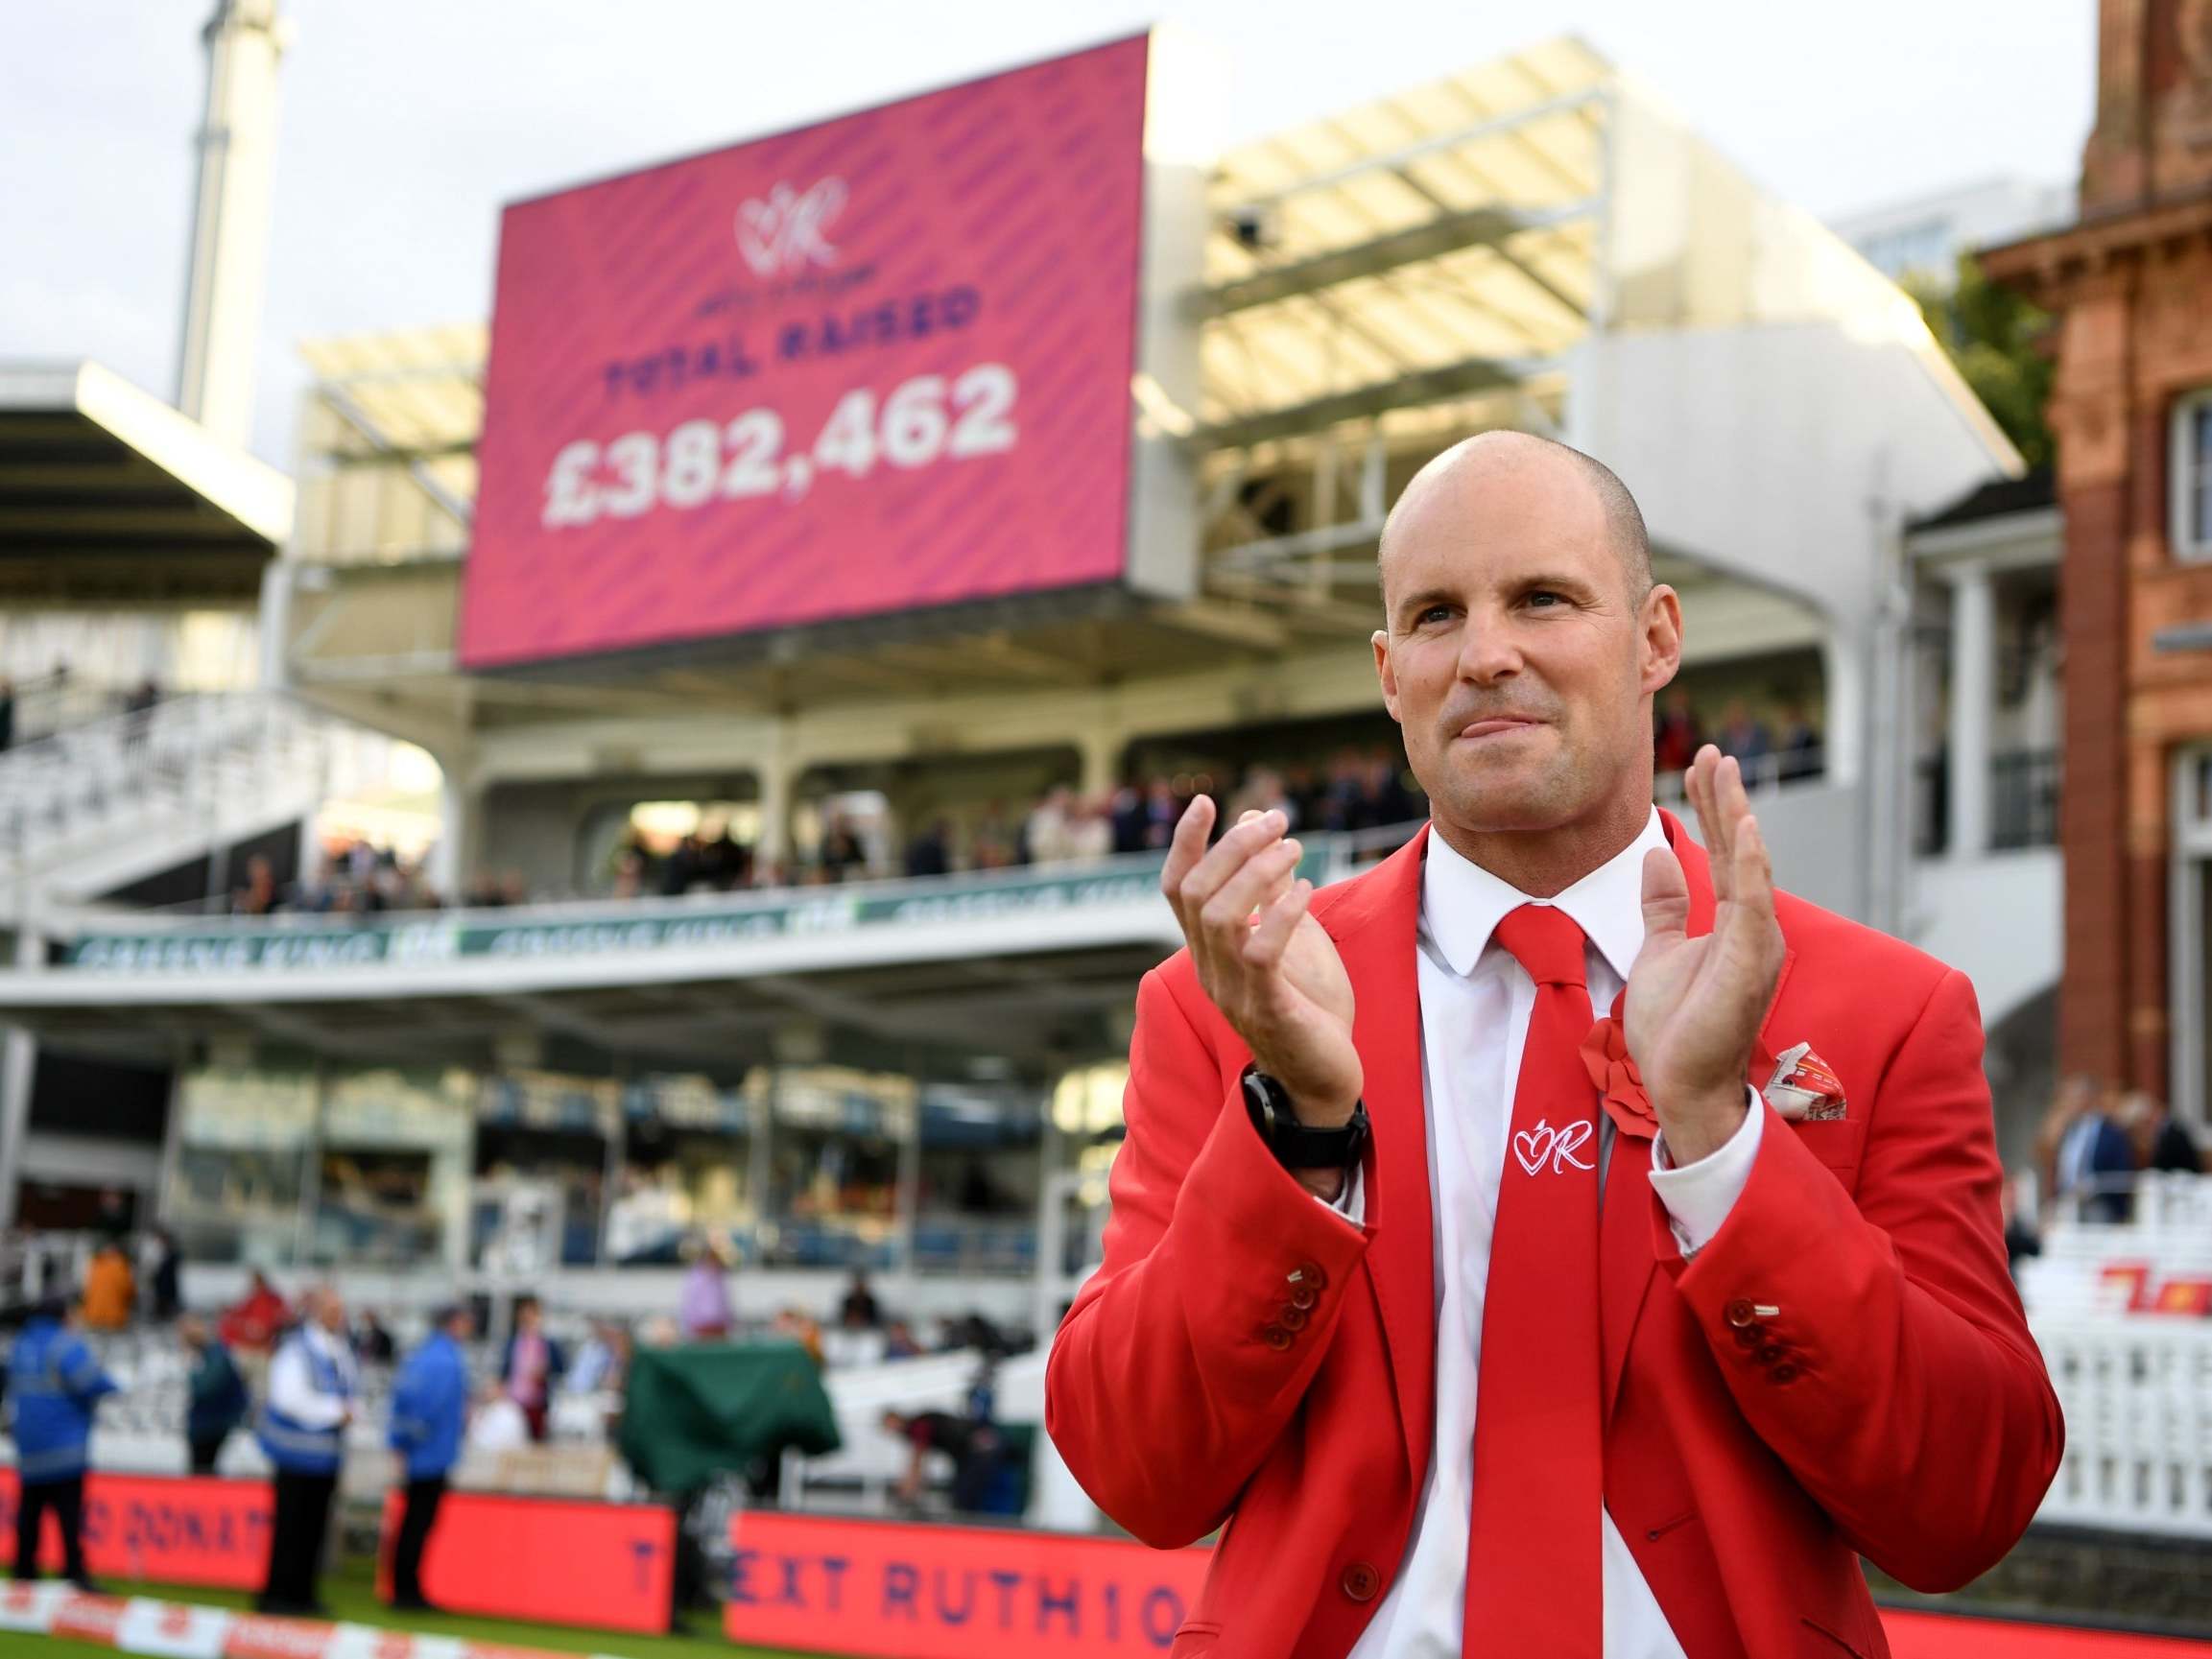 Strauss applauds at Lord's in aid of the Ruth Strauss Foundation